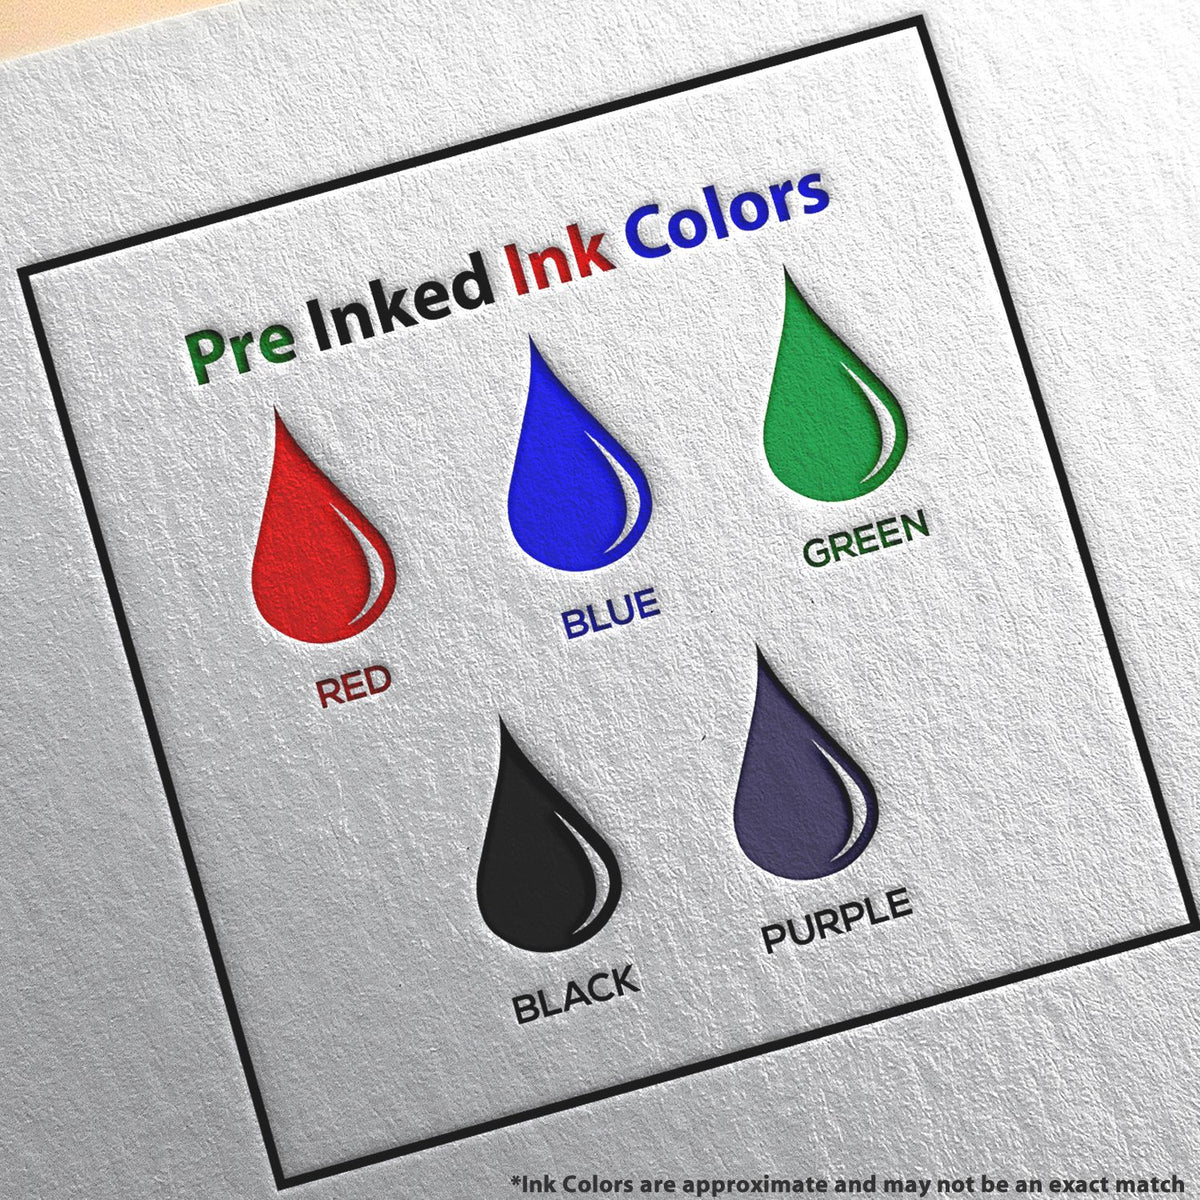 A picture showing the different ink colors or hues available for the Slim Pre-Inked Nebraska Architect Seal Stamp product.